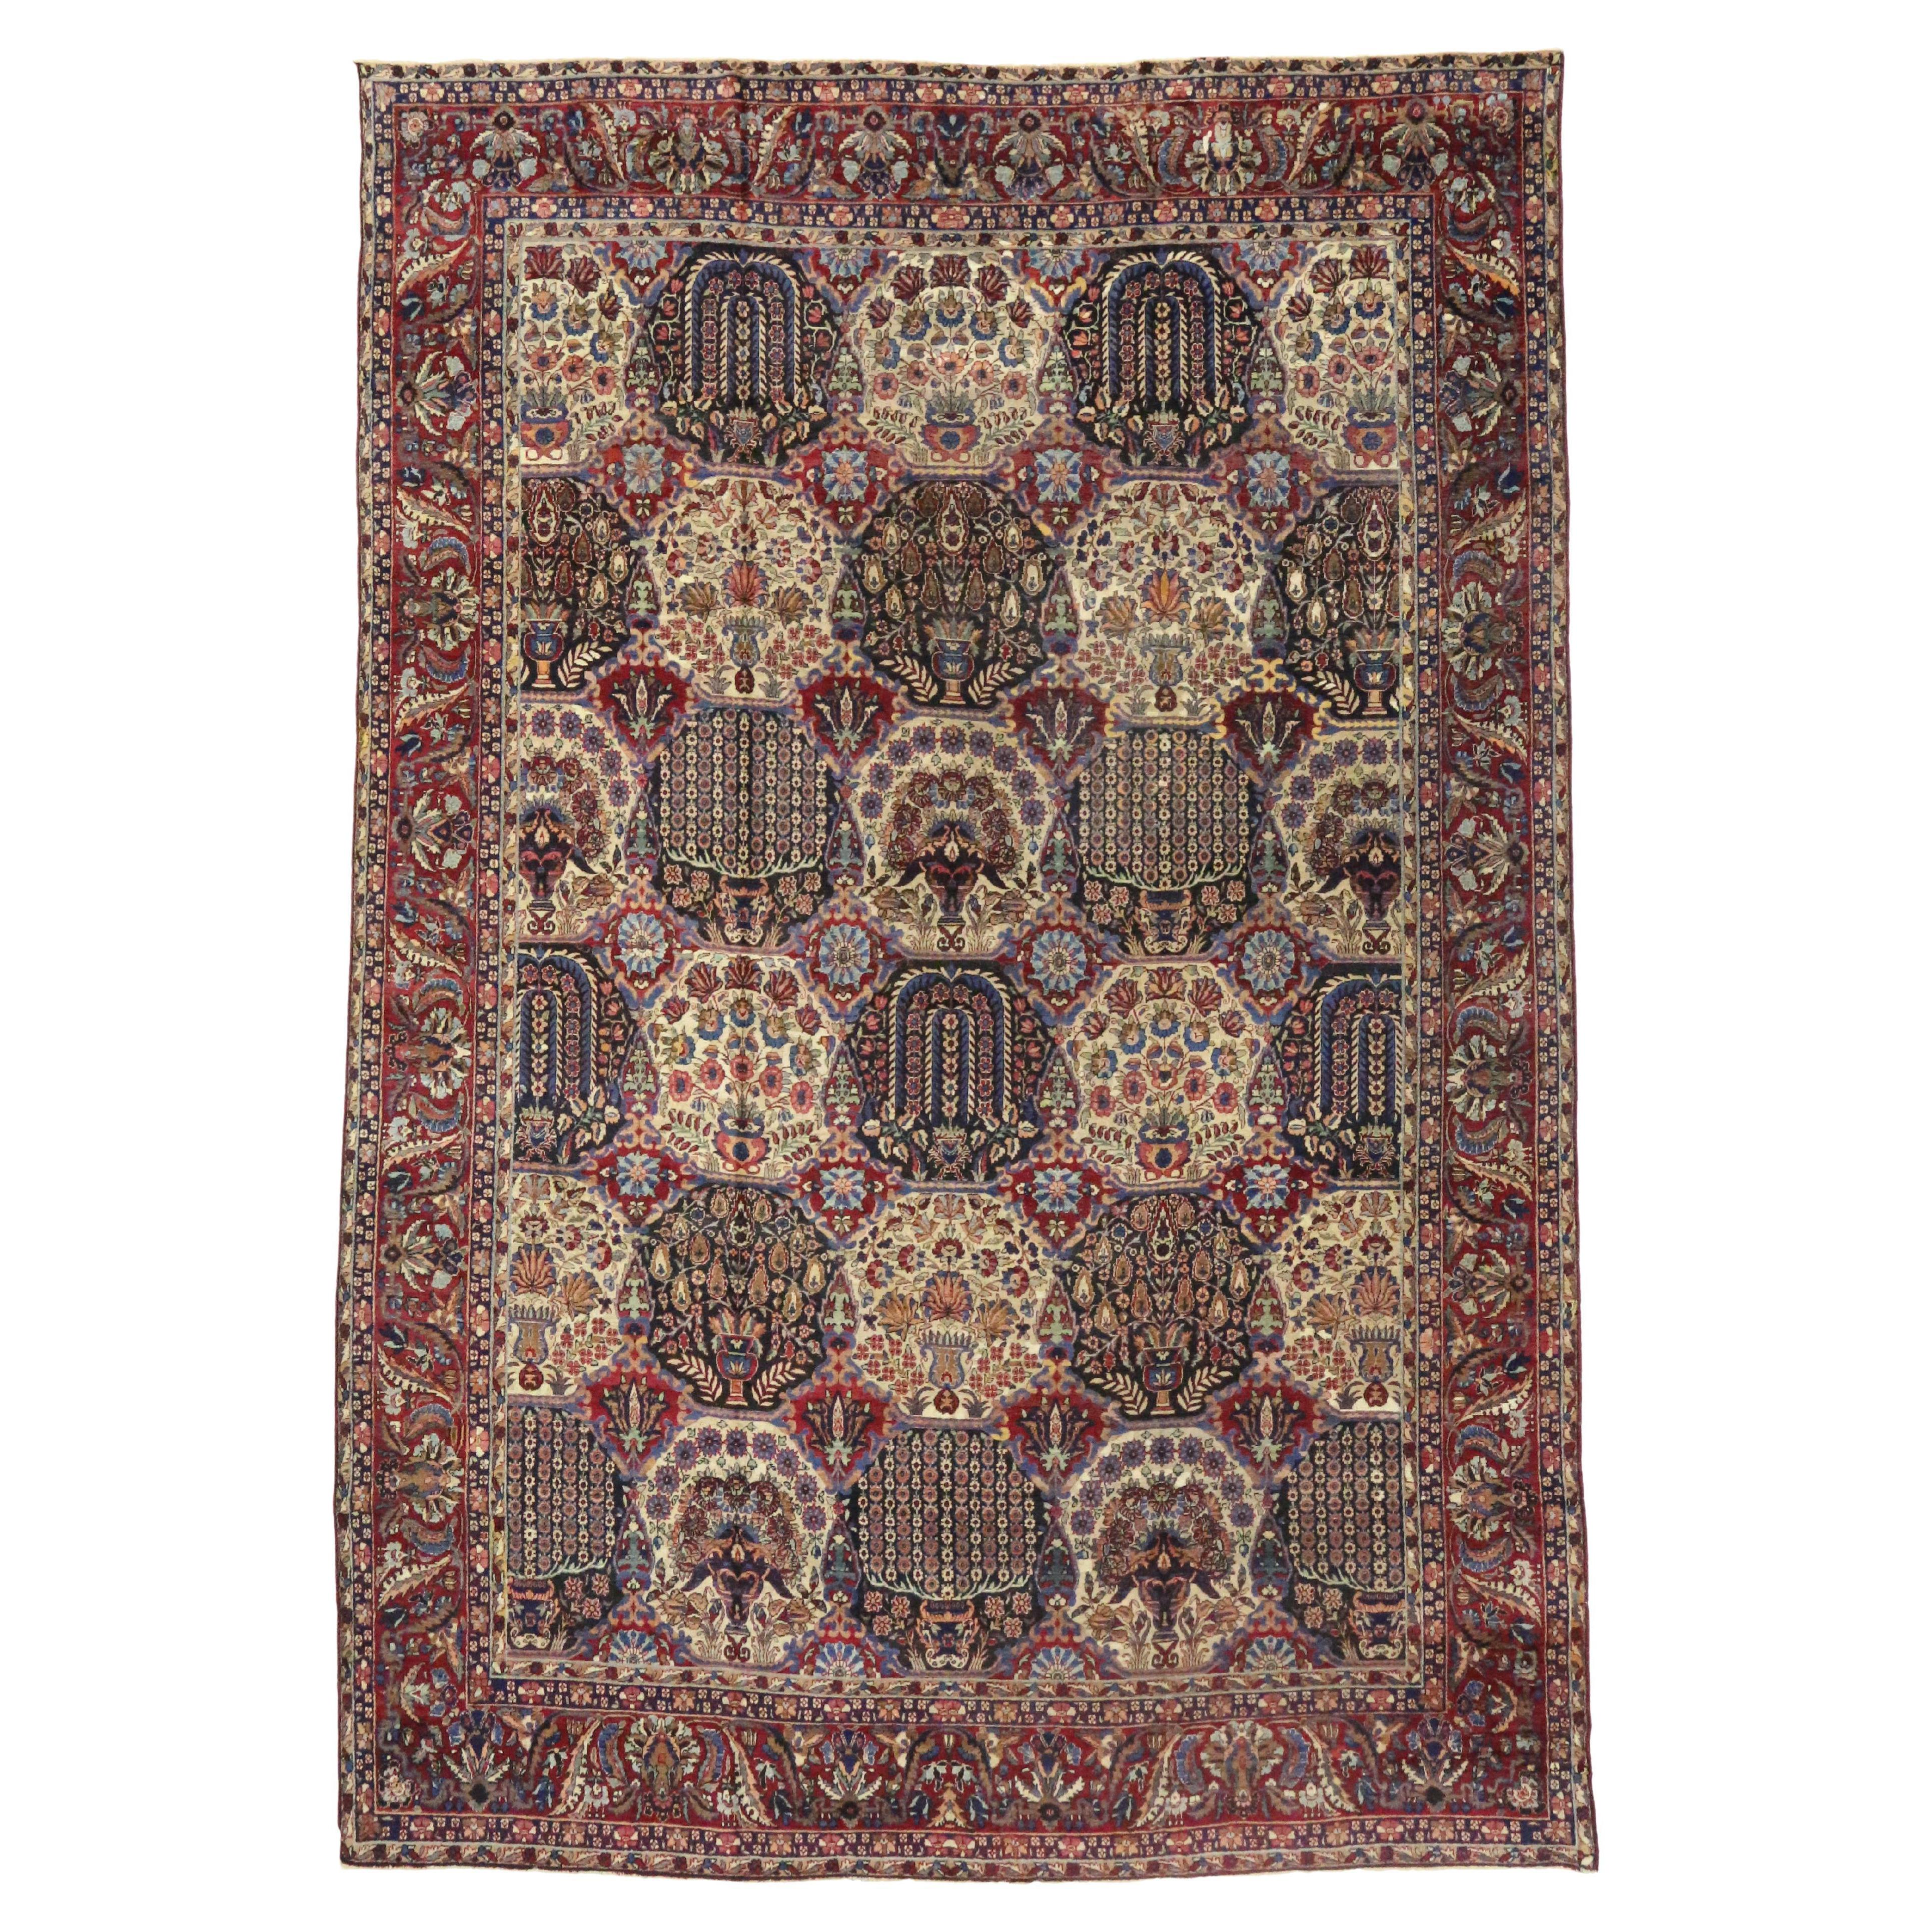 Antique Persian Yazd Palace Rug with Victorian Style and Garden Design For Sale